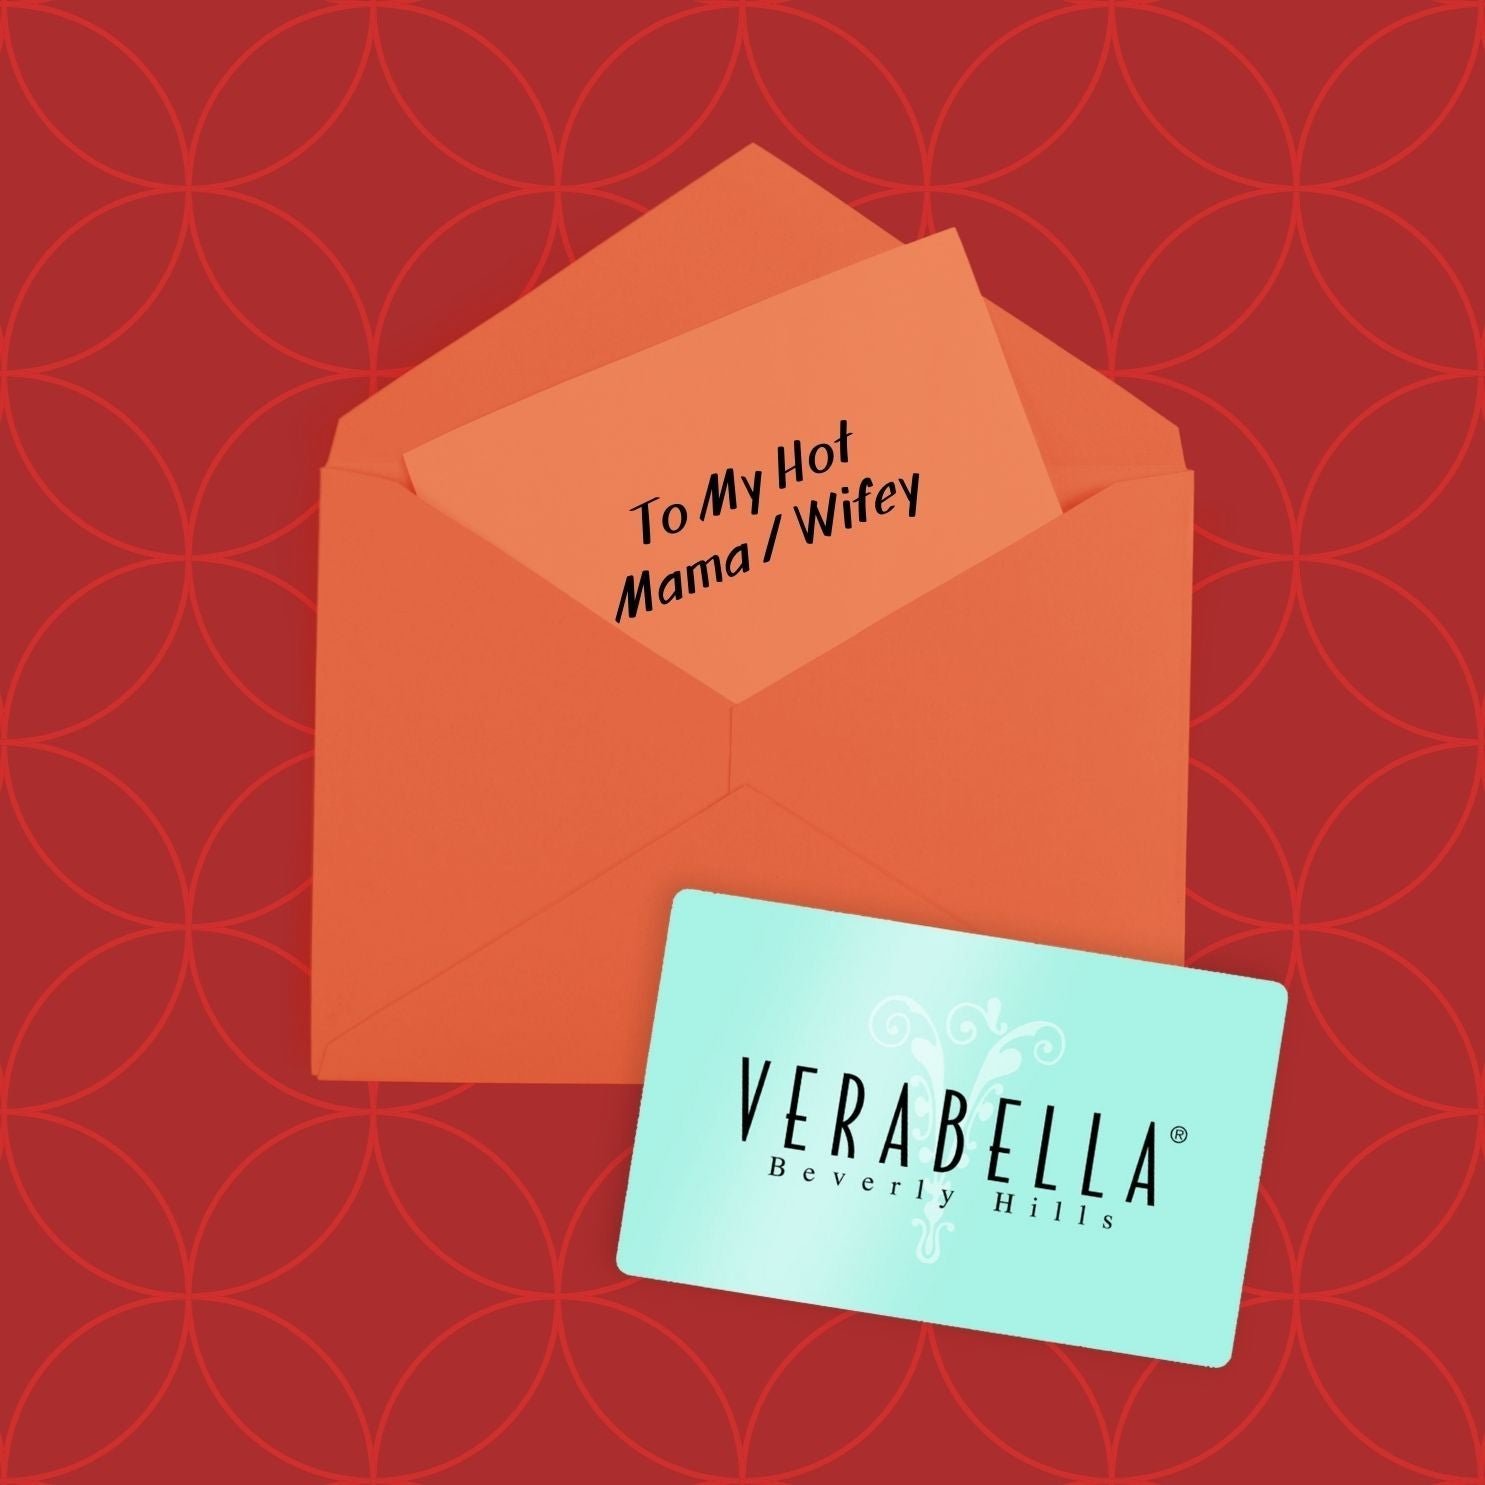 Mother's Day, birthday, or just because... VERABELLA gift cards are perfect